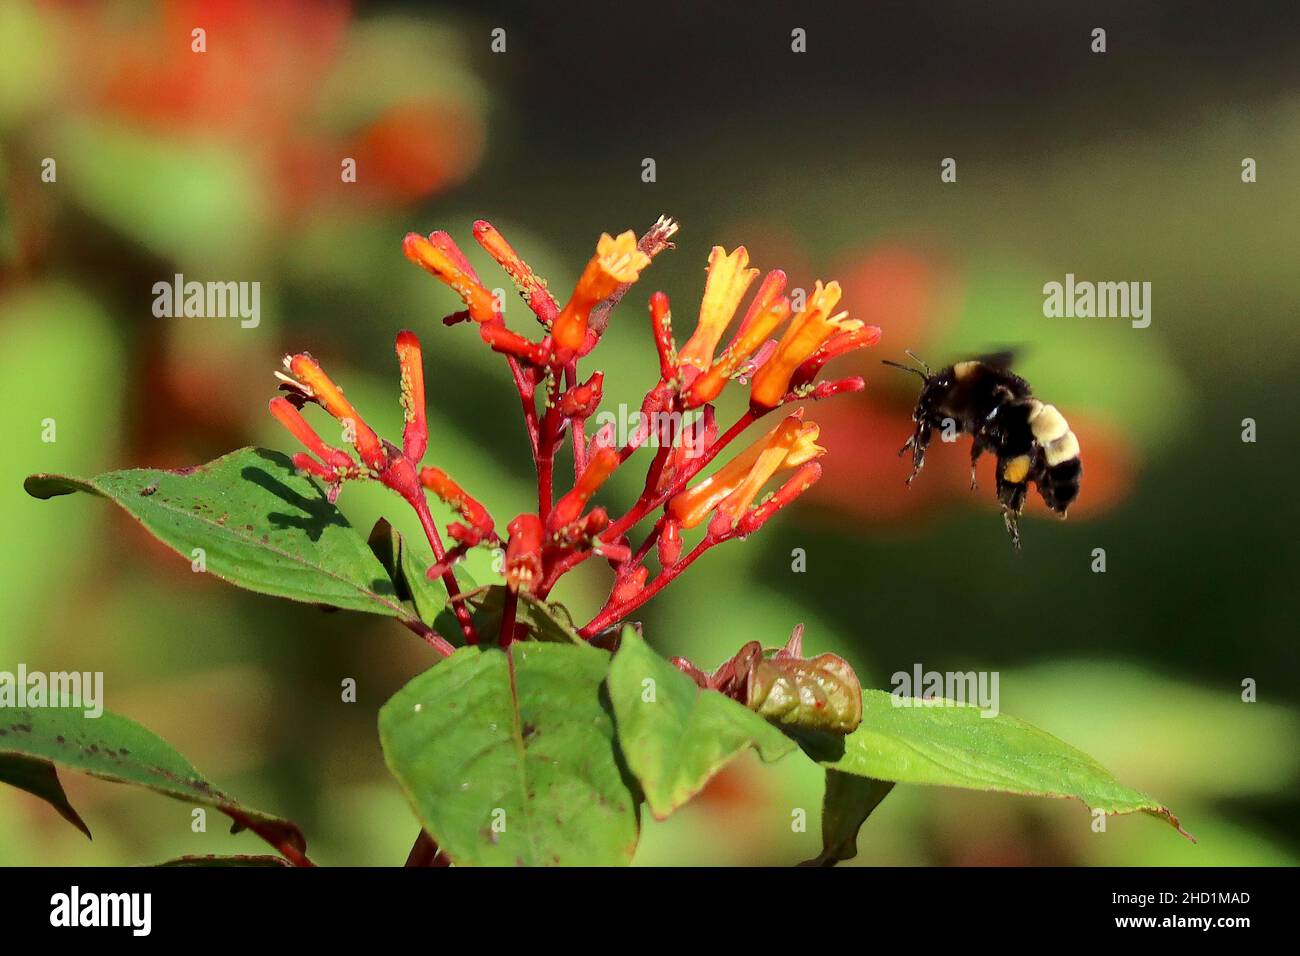 Selective focus shot of a bumblebee flying over hamelia patens (Firebush) buds Stock Photo